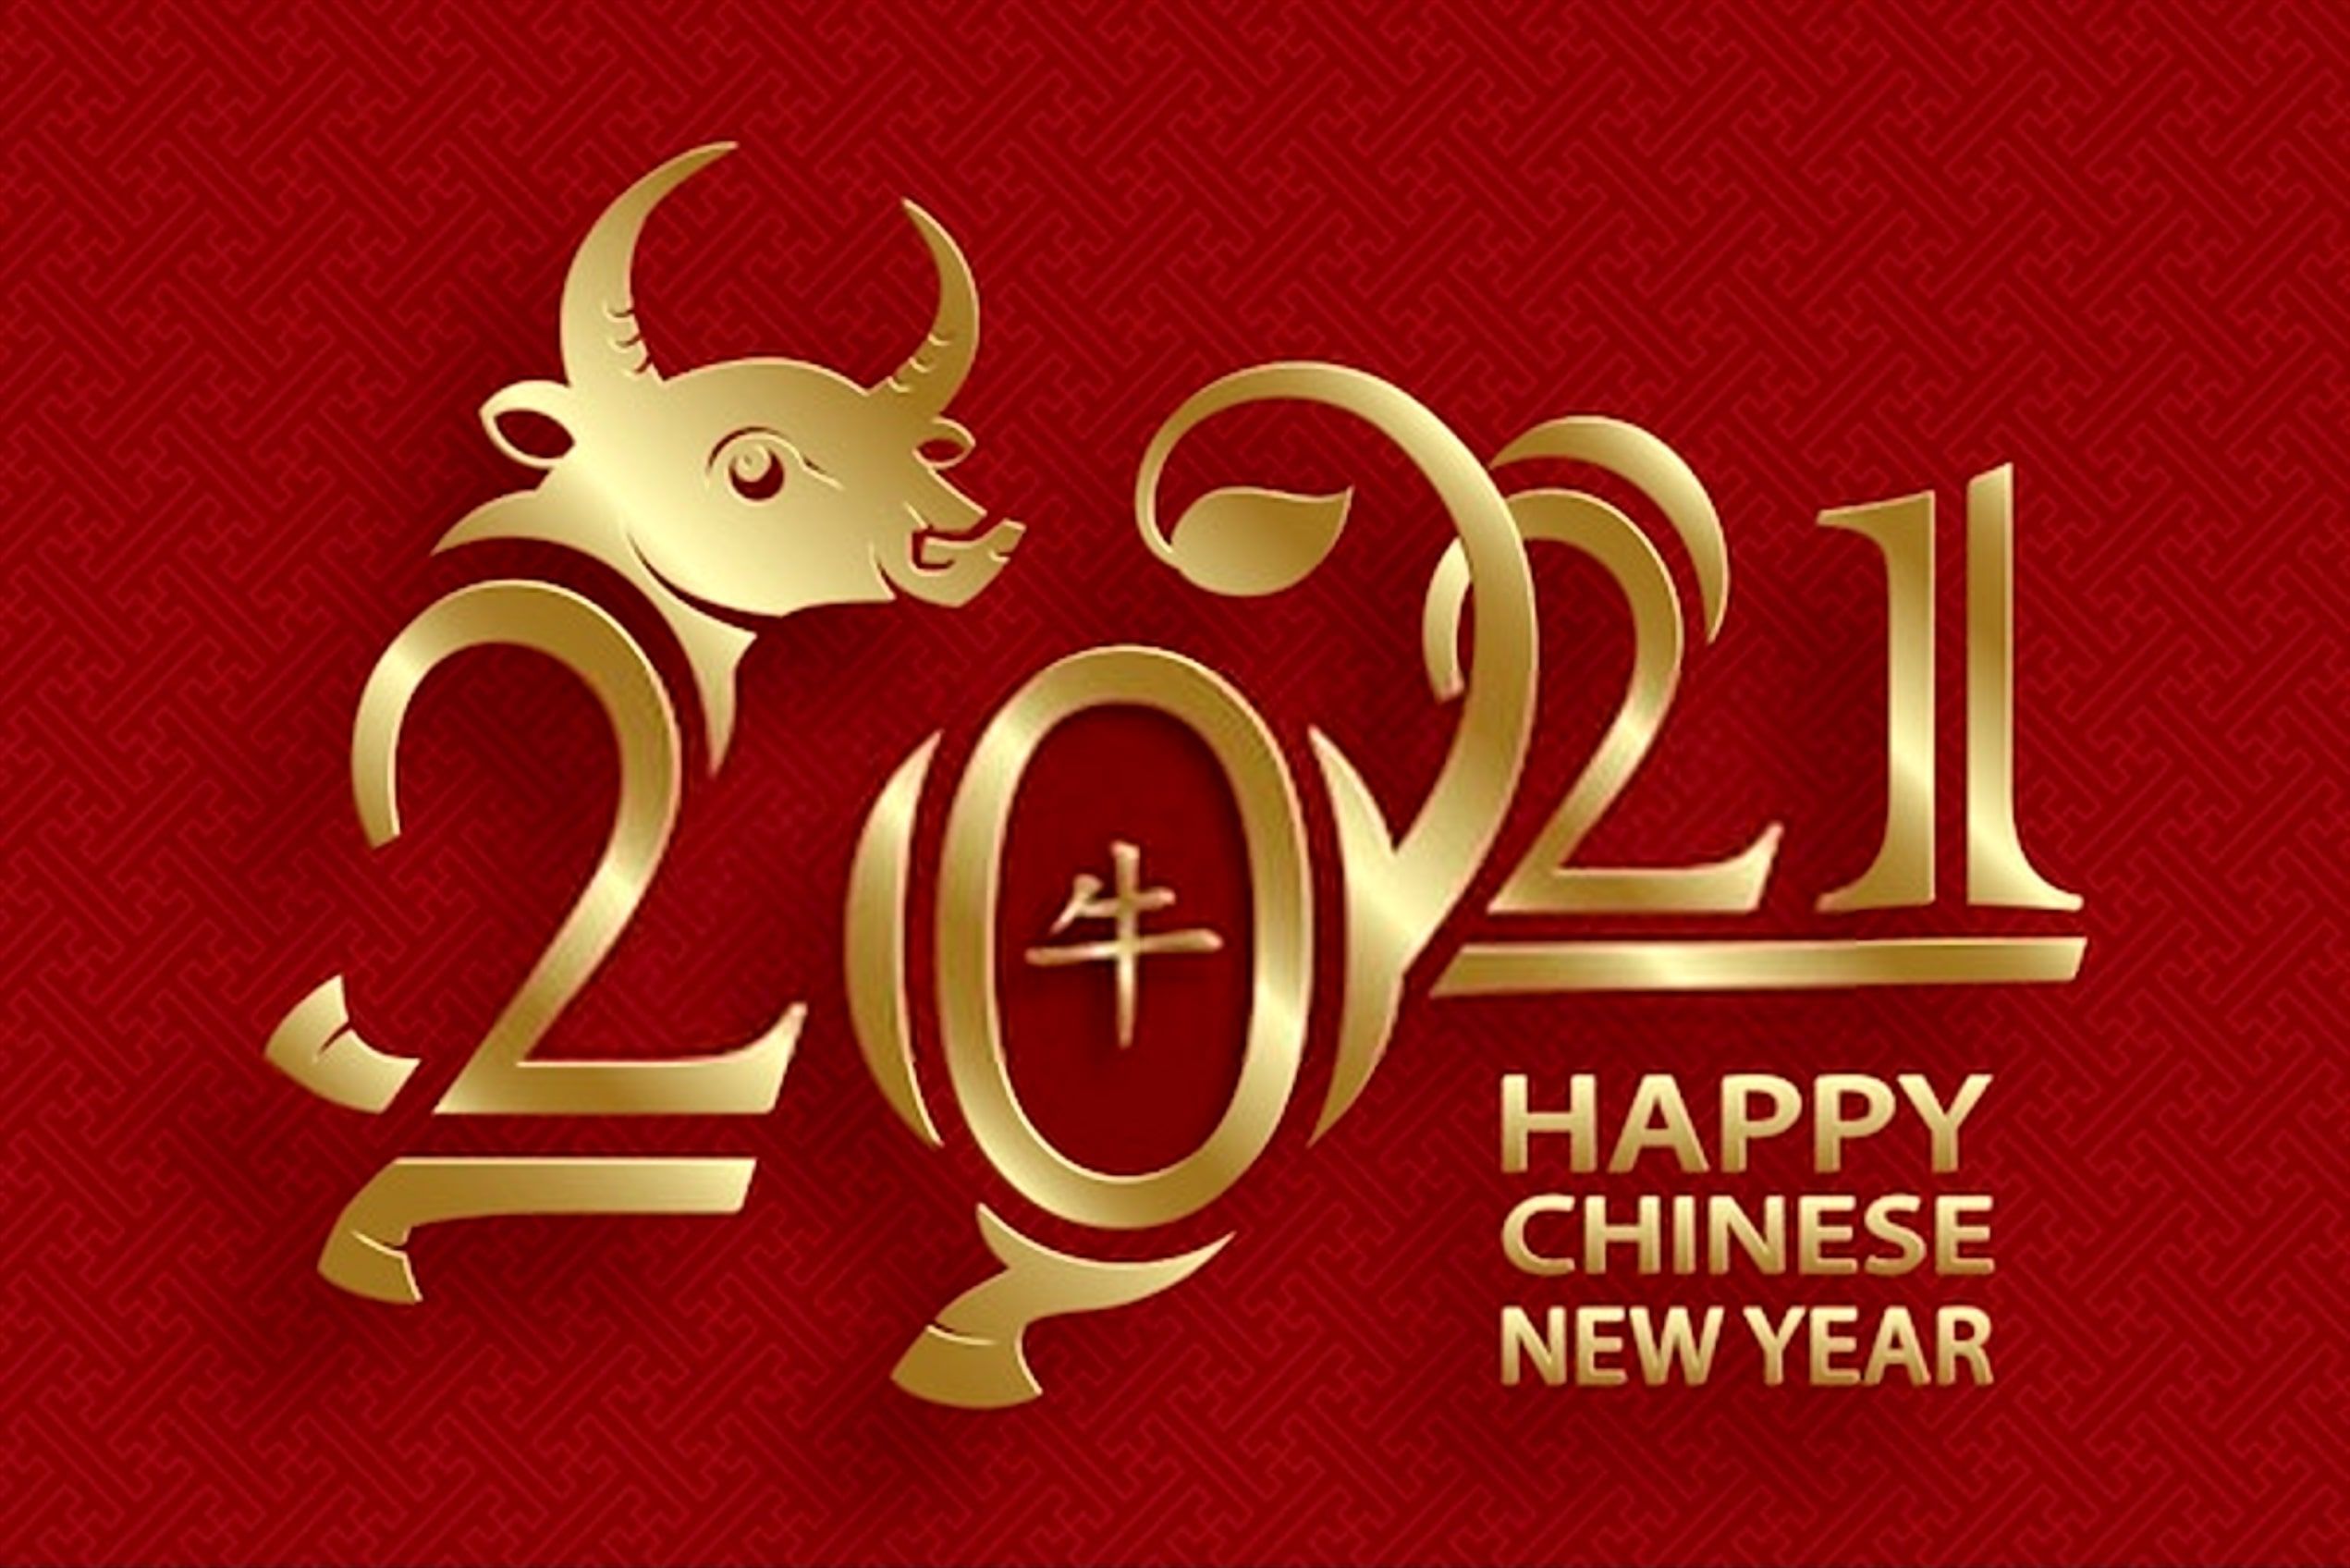 Chinese New Year 2021 Image and Wallpaper. Happy chinese new year, Christmas activity book, Chinese new year image